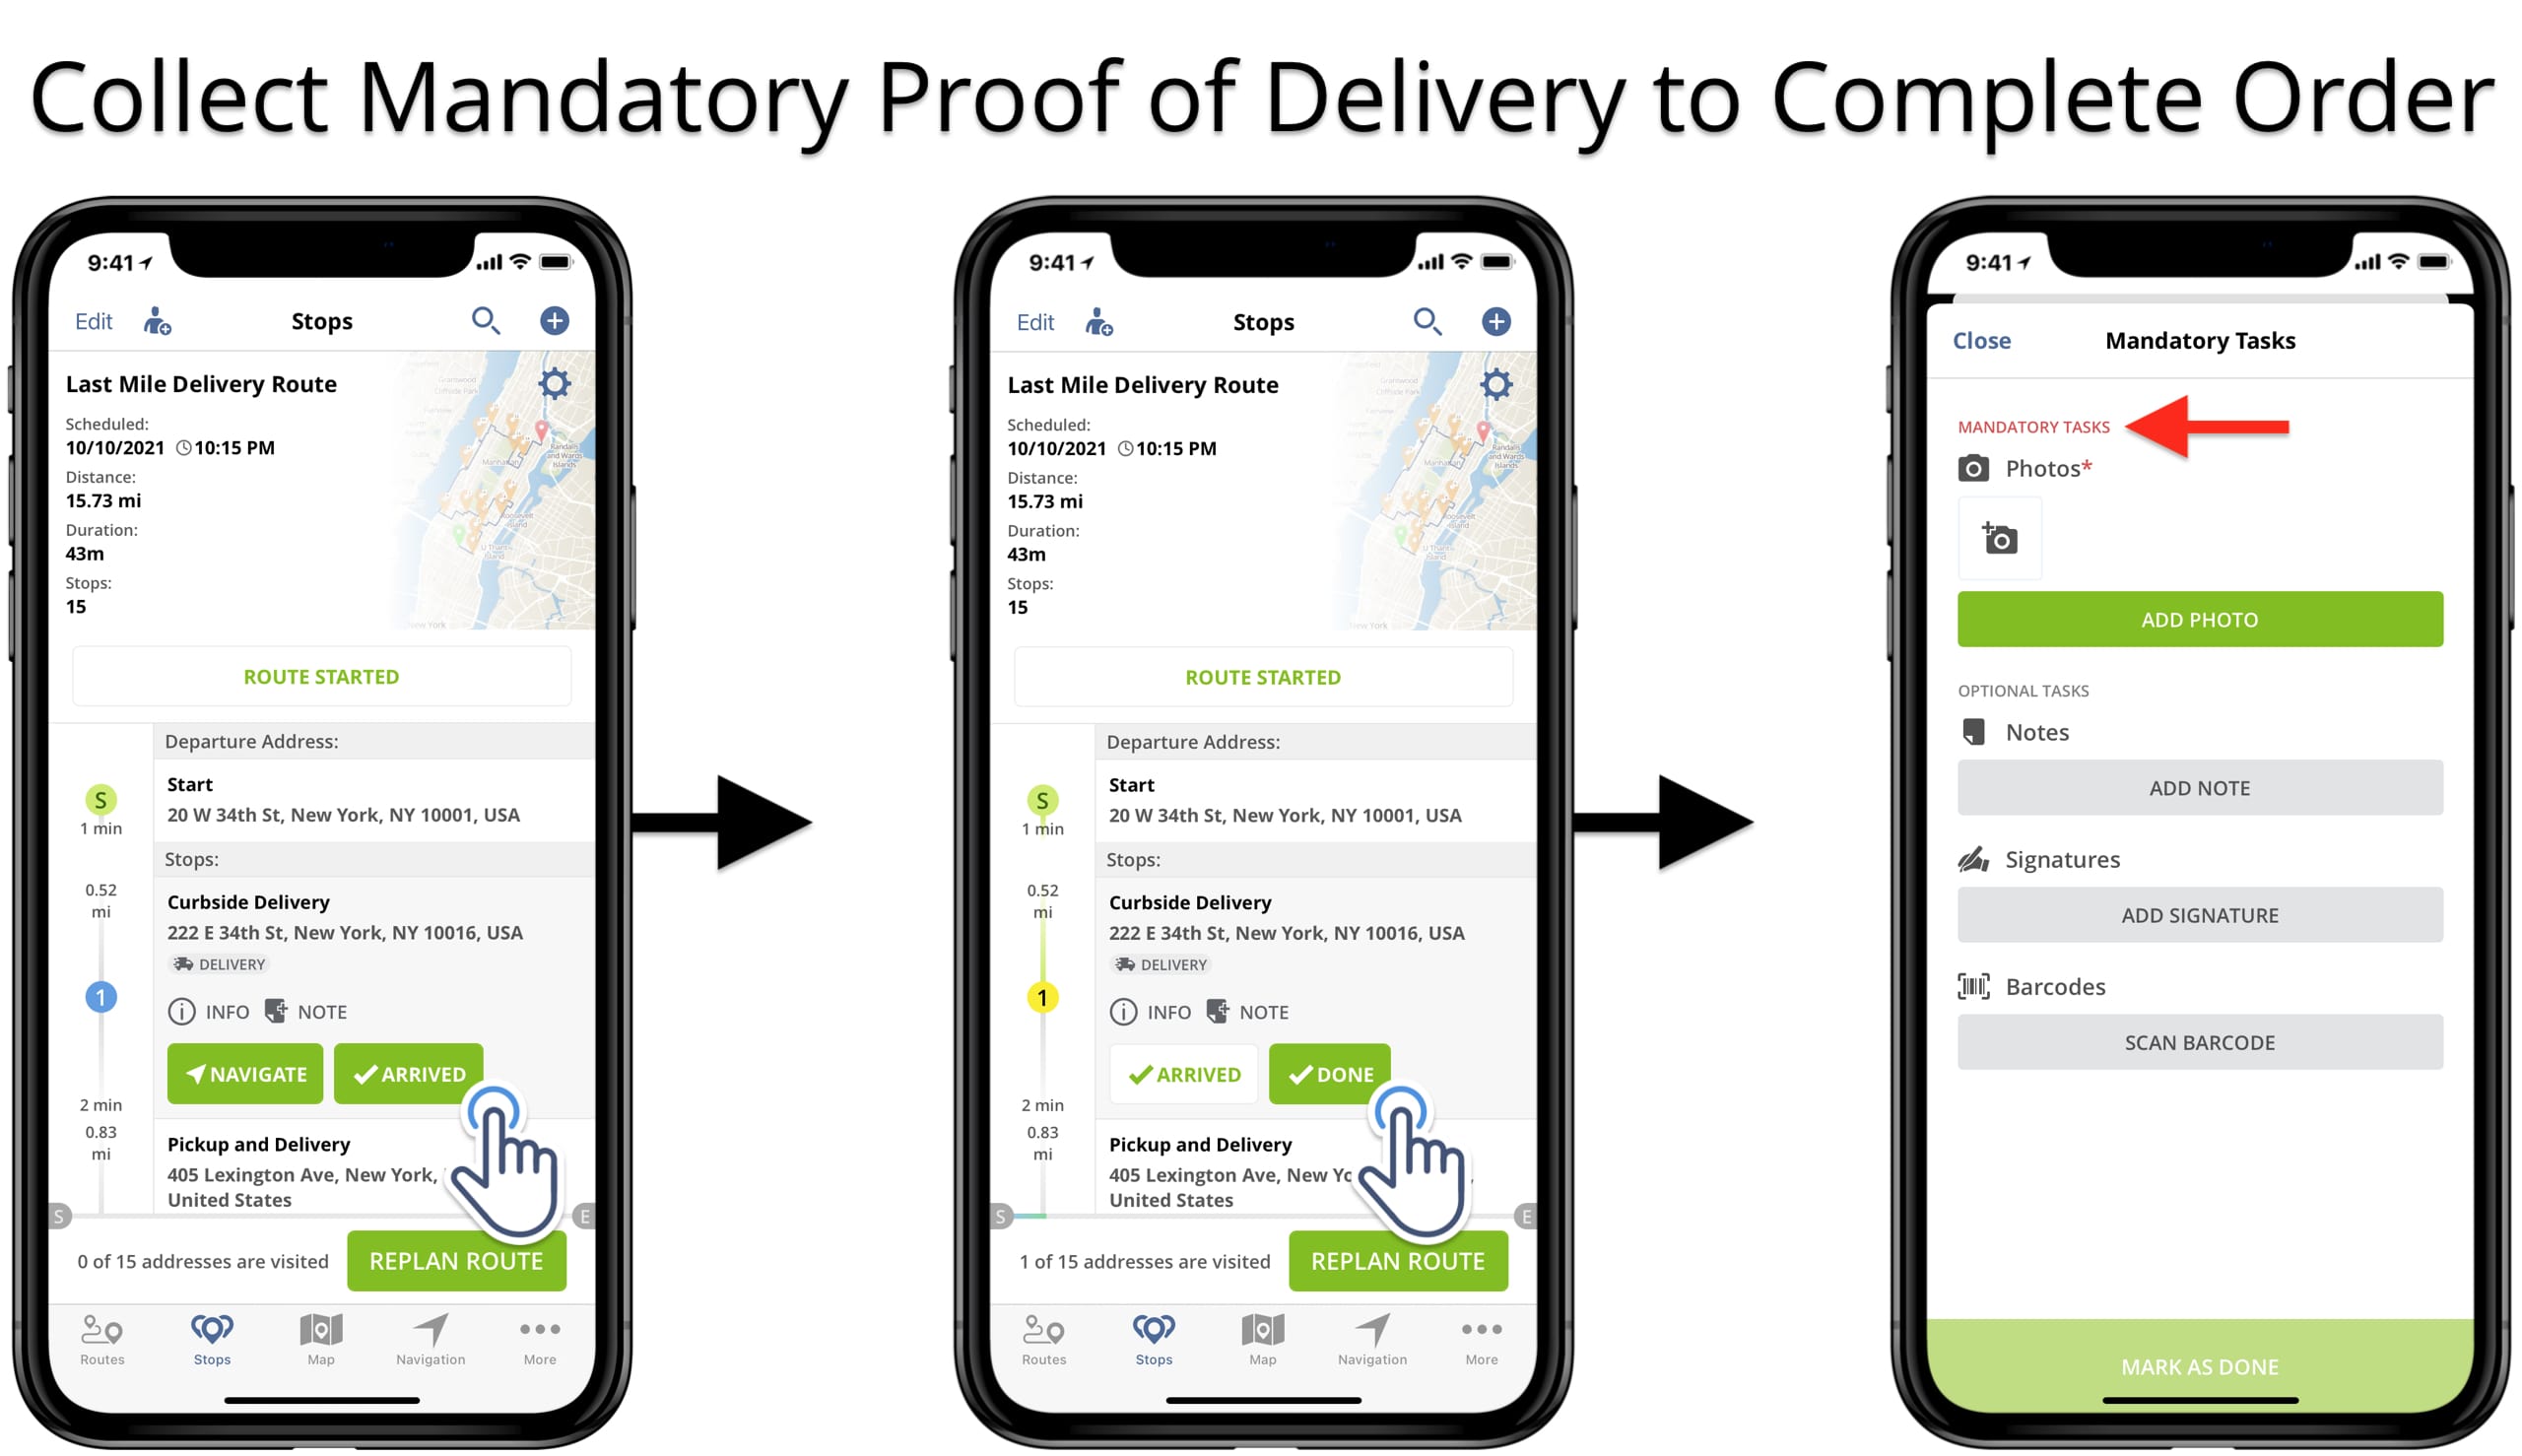 Mandatory image attachment is required to complete order and save delivery POD on route planner.